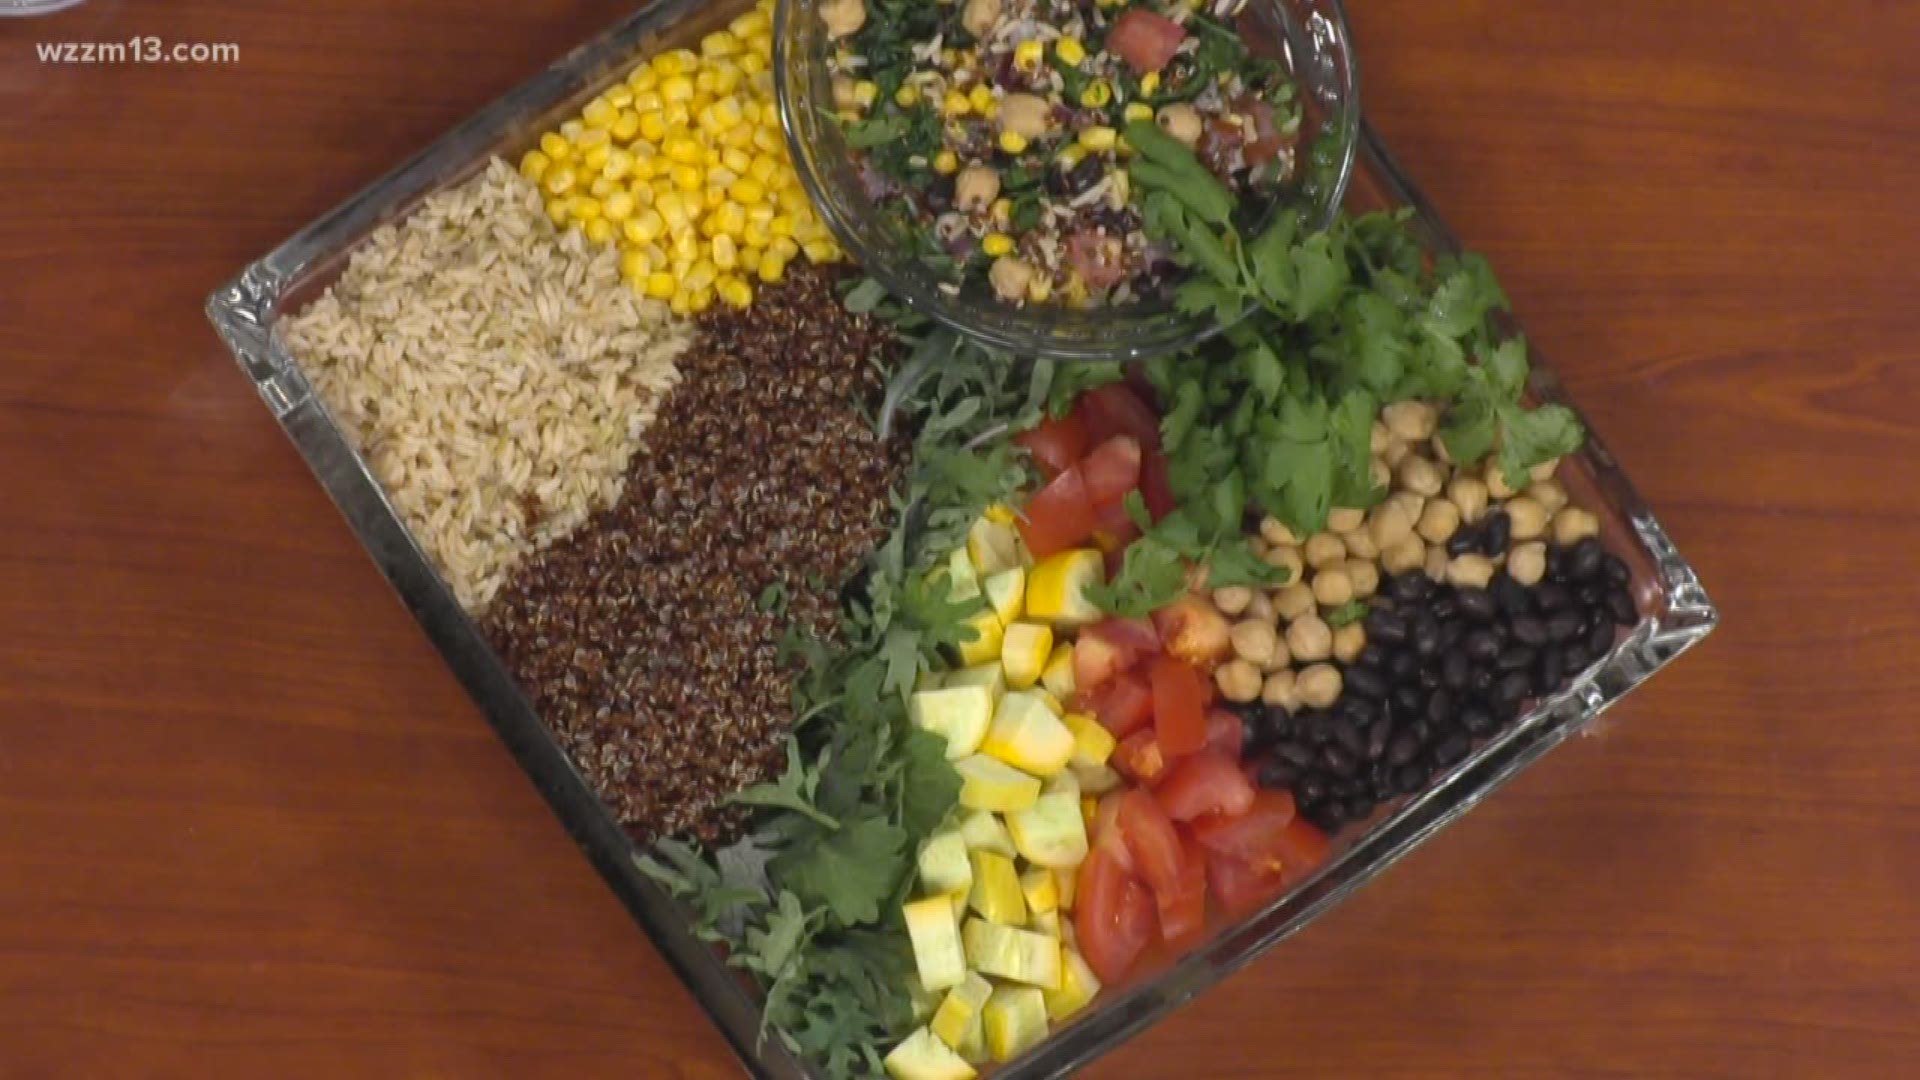 Eating healthy doesn't have to be boring, Chef Jenn shows us how.